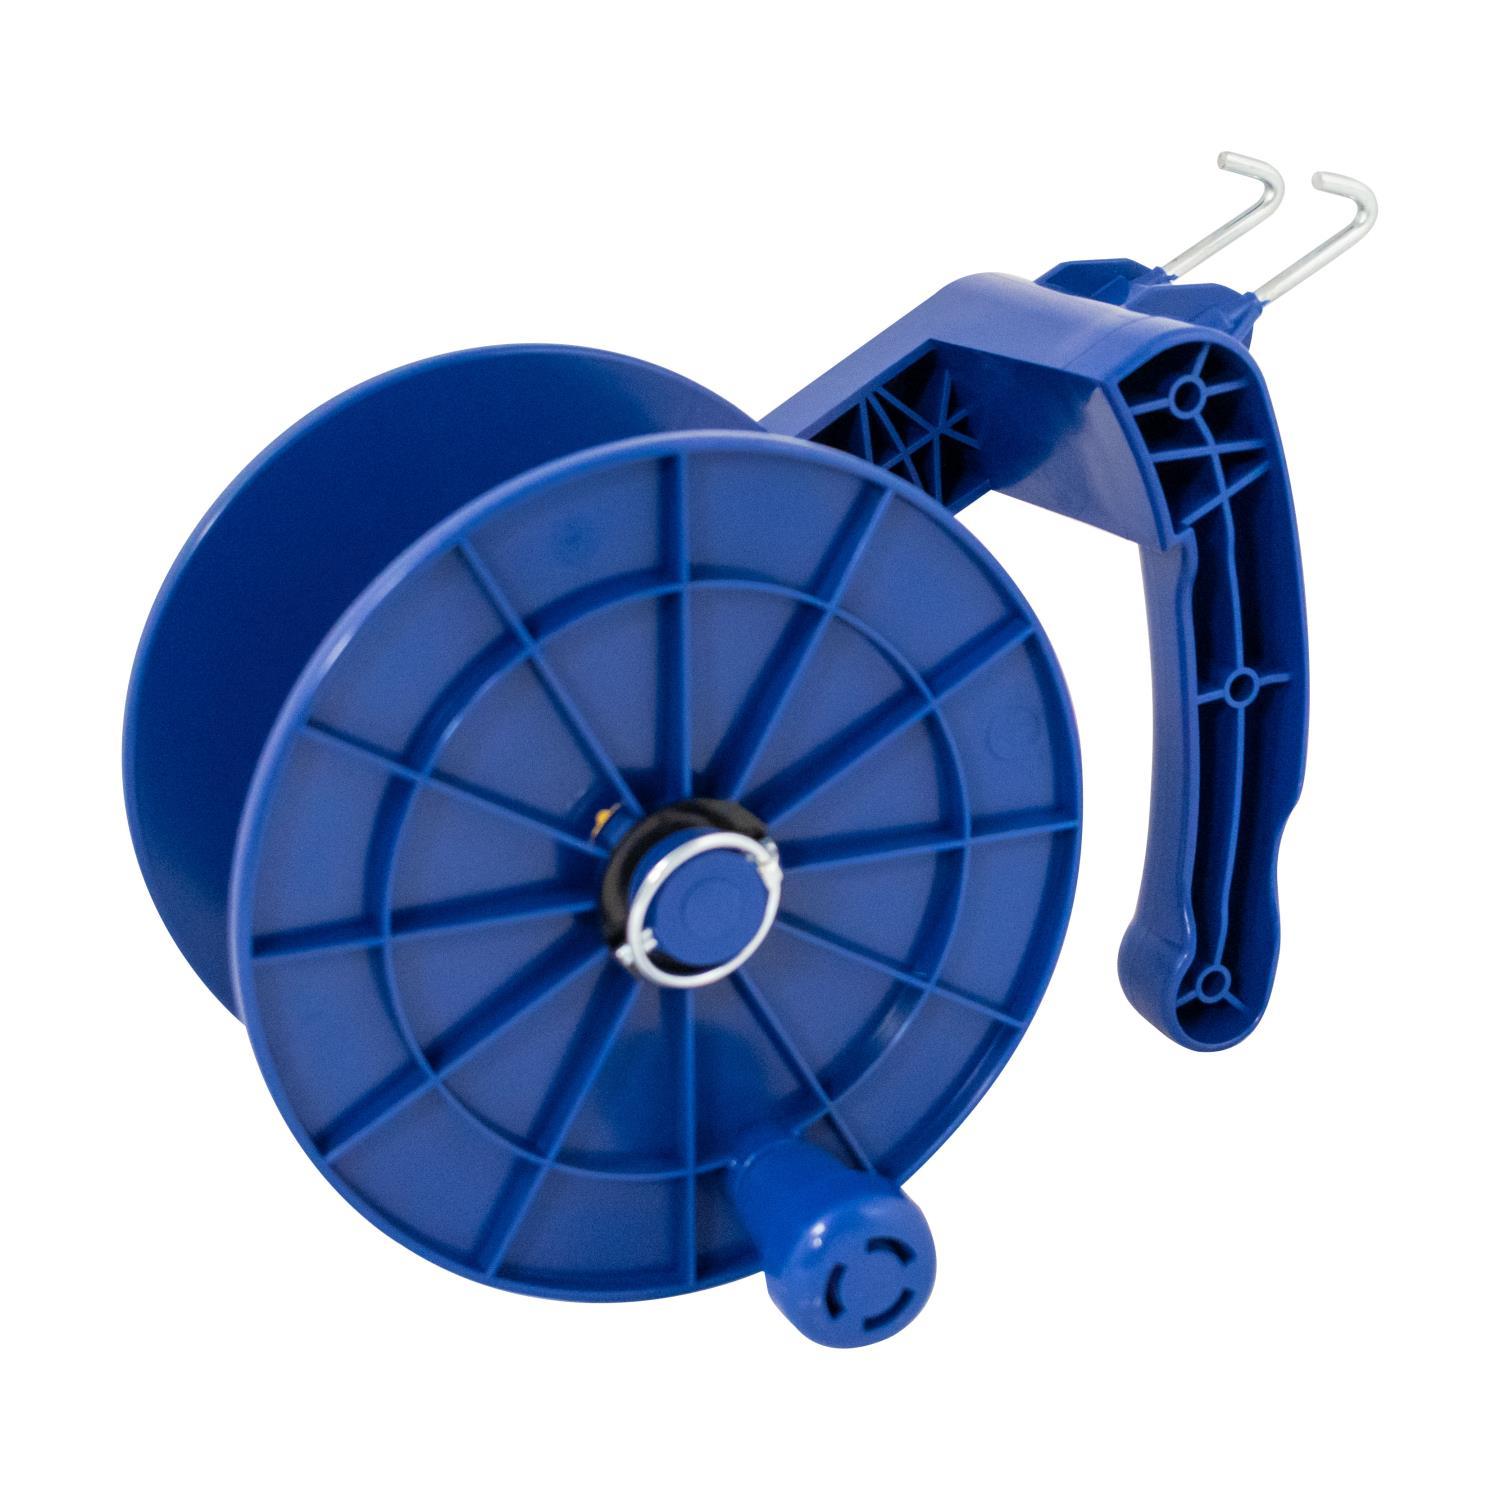 Buy Gallagher Medium Geared Reel from Fane Valley Stores